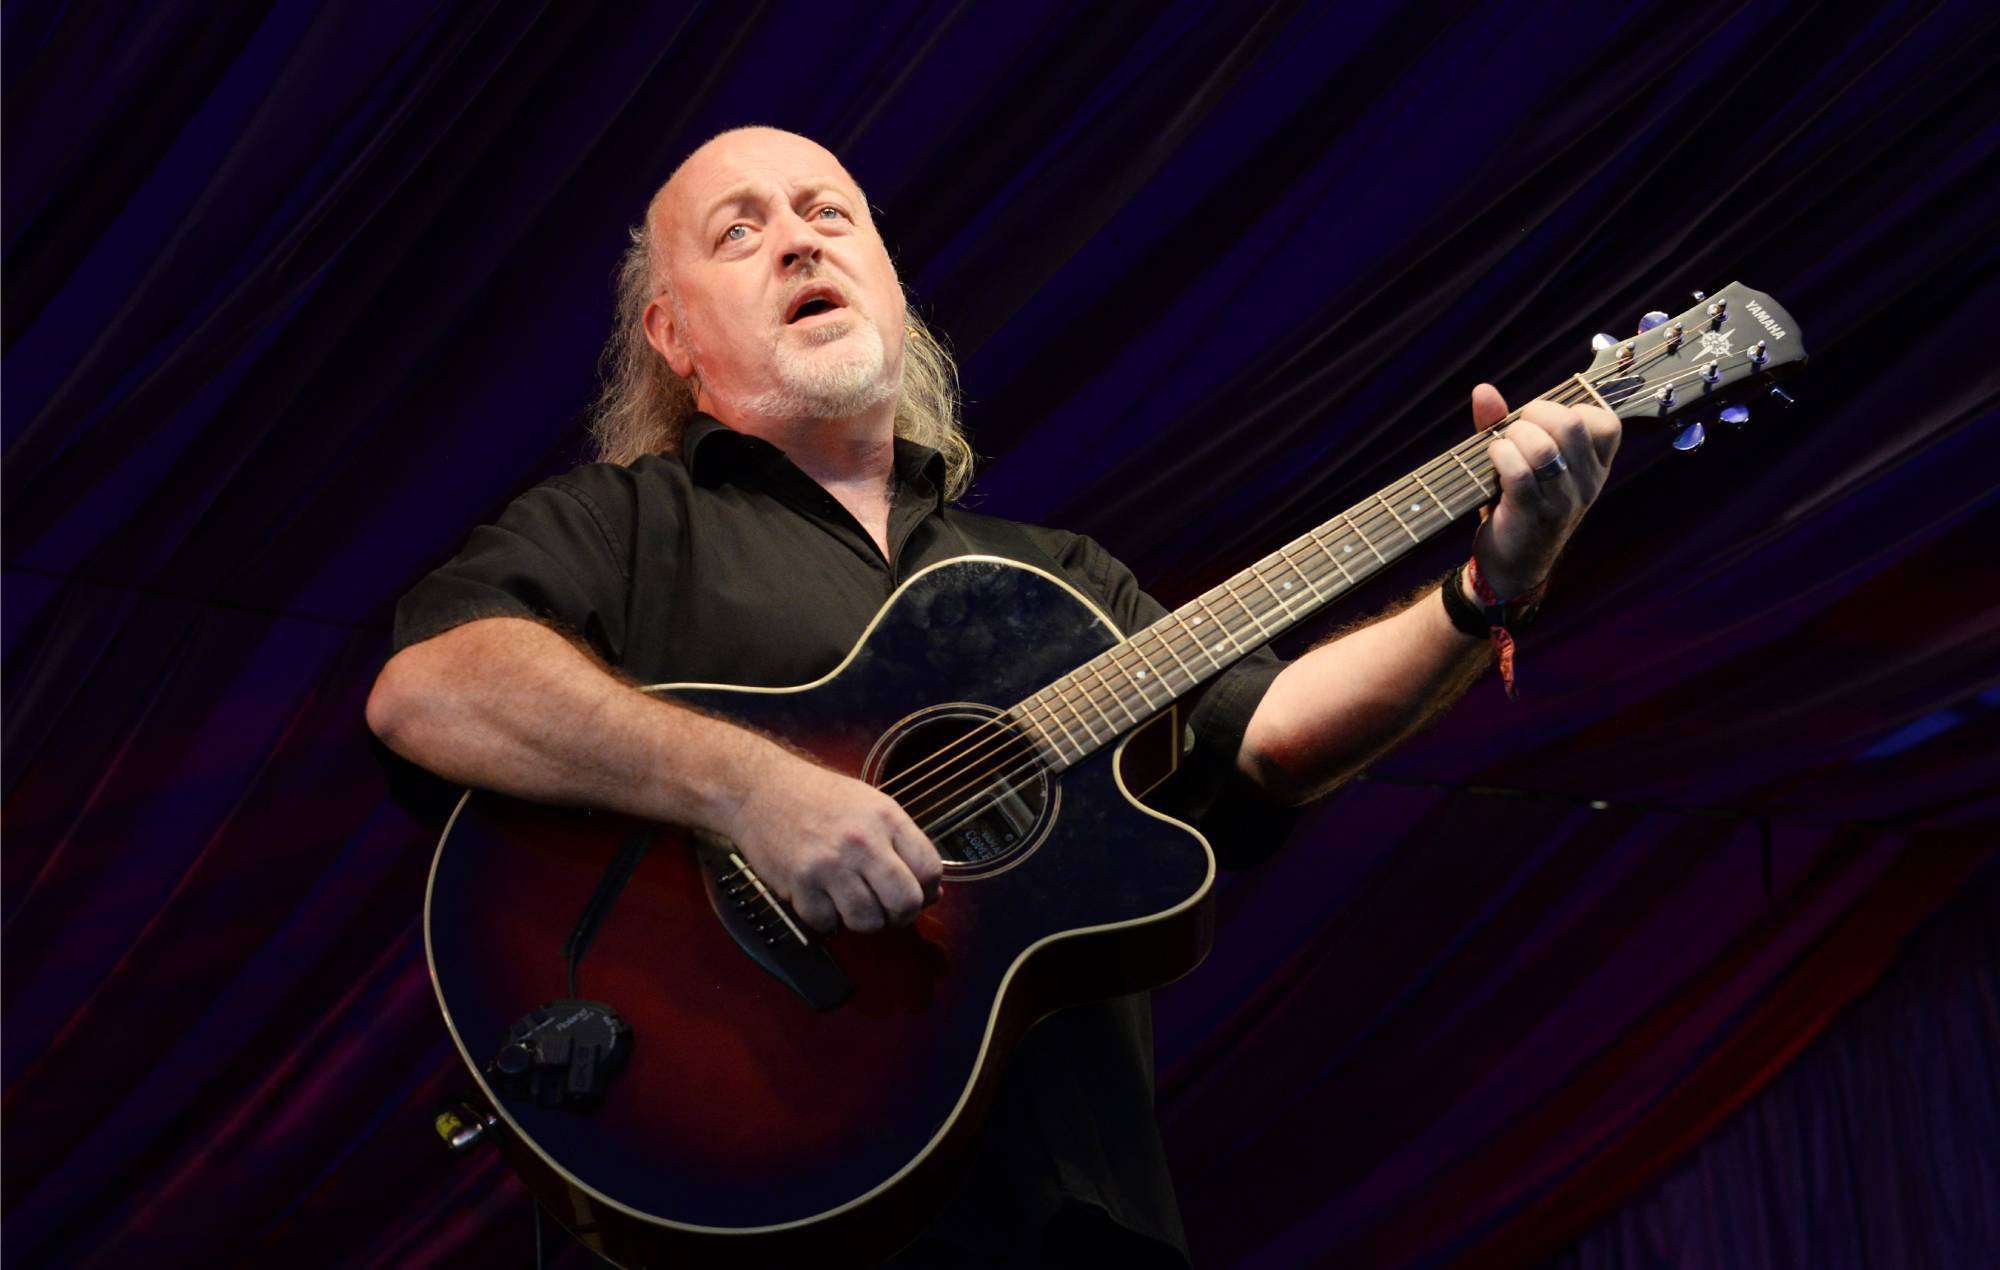 image for Bill Bailey has put himself forward for the UK’s Eurovision 2022 entry